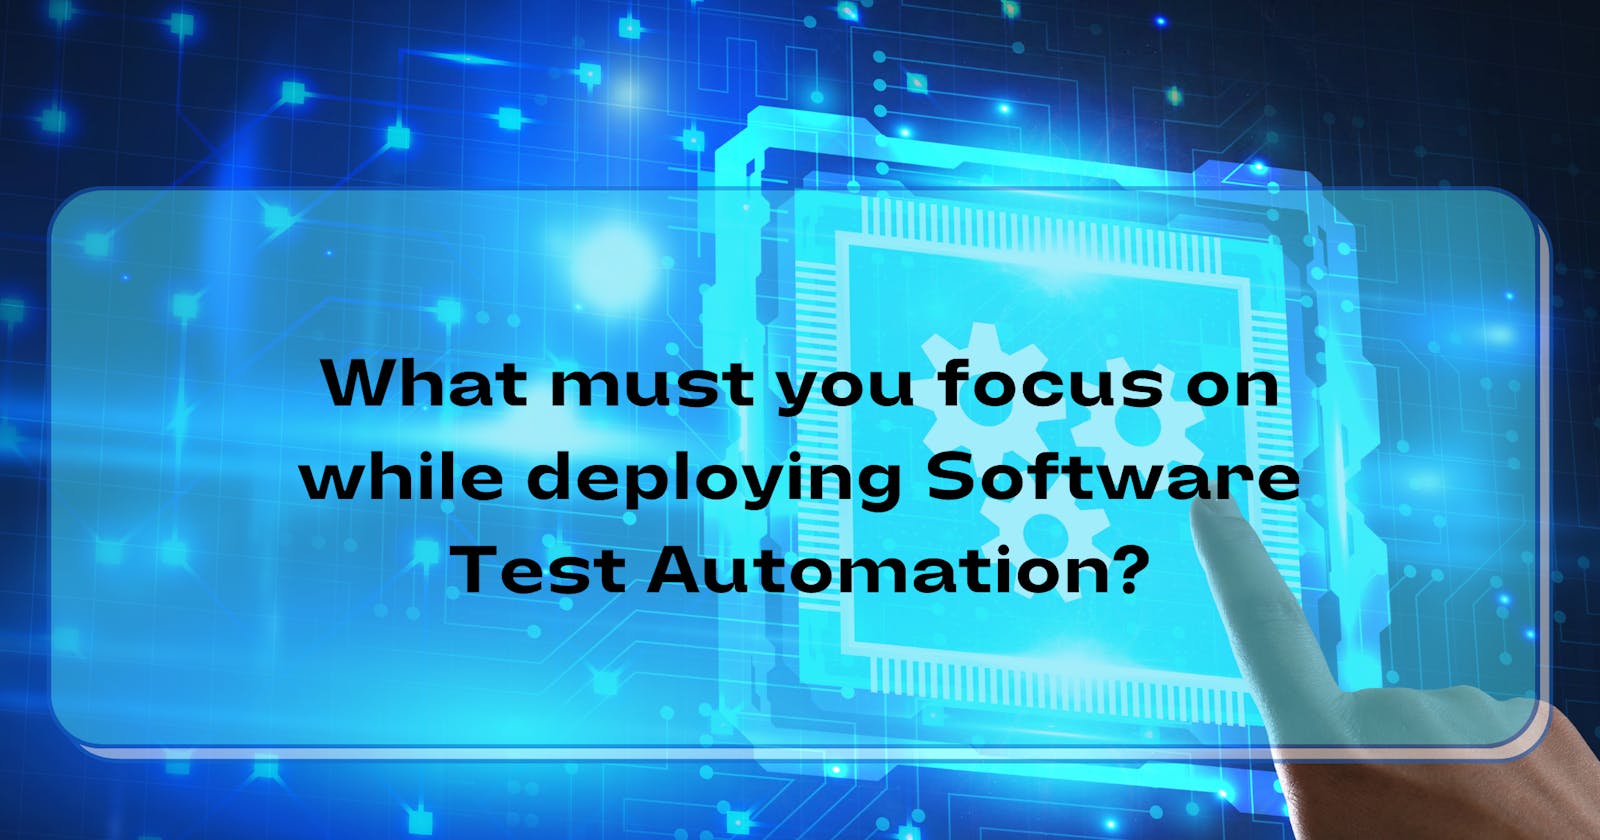 What must you focus on while deploying Software Test Automation?